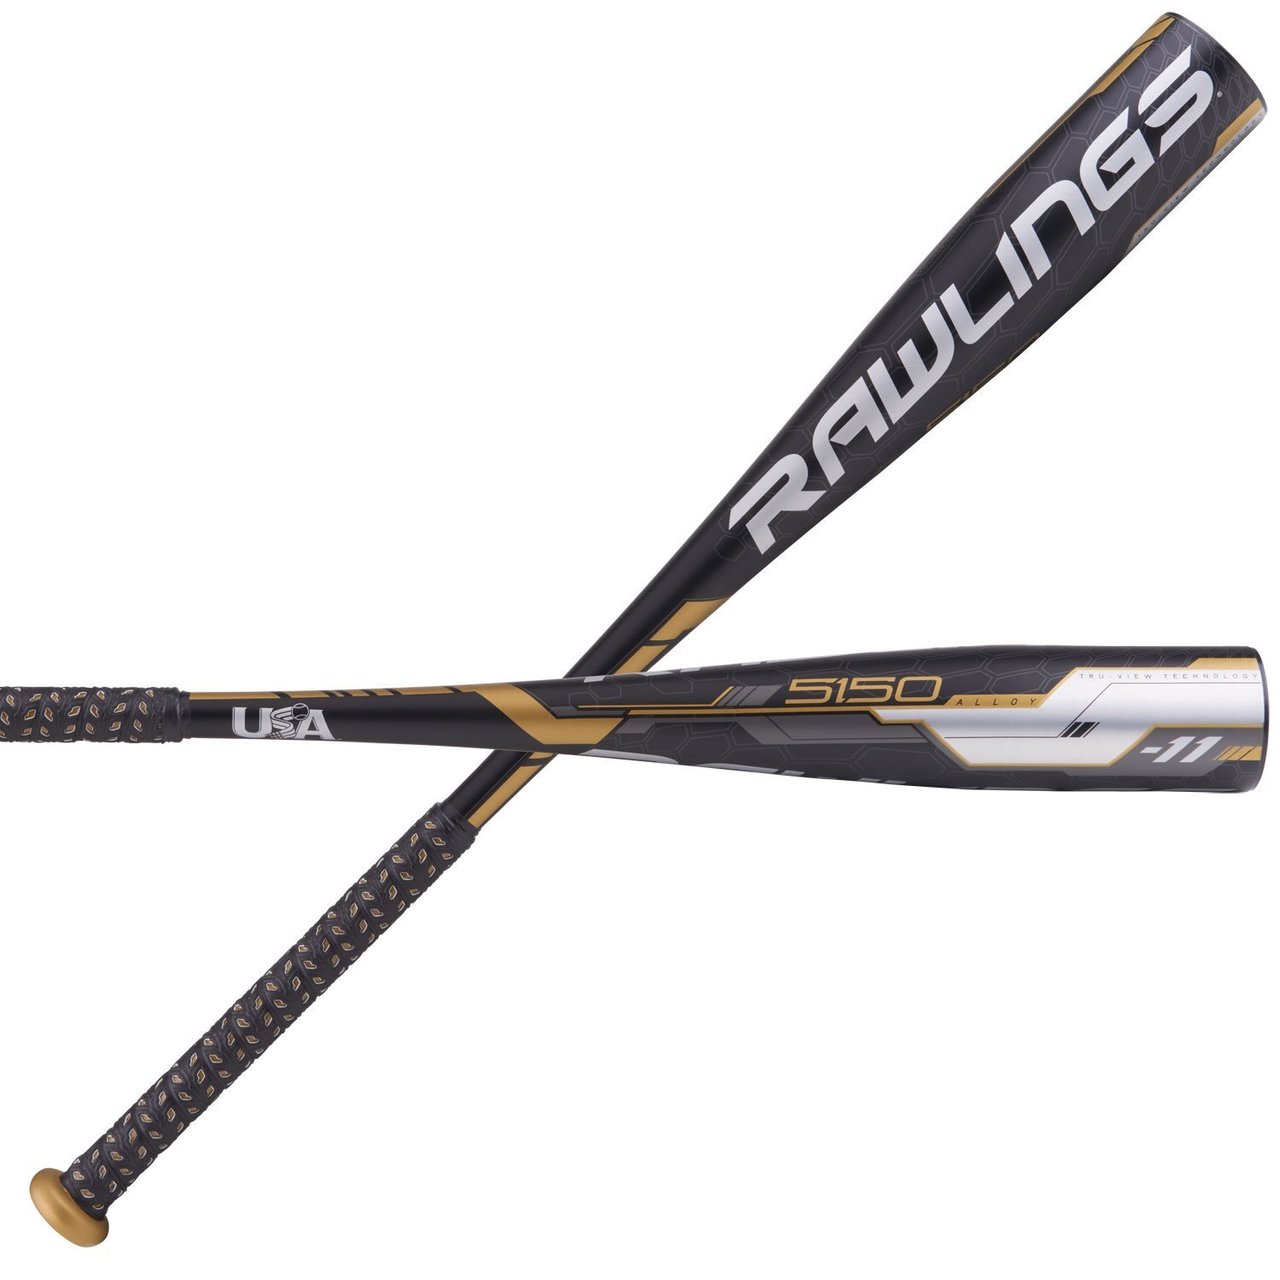 rawlings-2018-usa-baseball-bat-5150-11-27-in-16-oz US8511-2716 Rawlings  083321414602 High-performance metal Baseball bat delivers exceptional pop and balance Engineered with